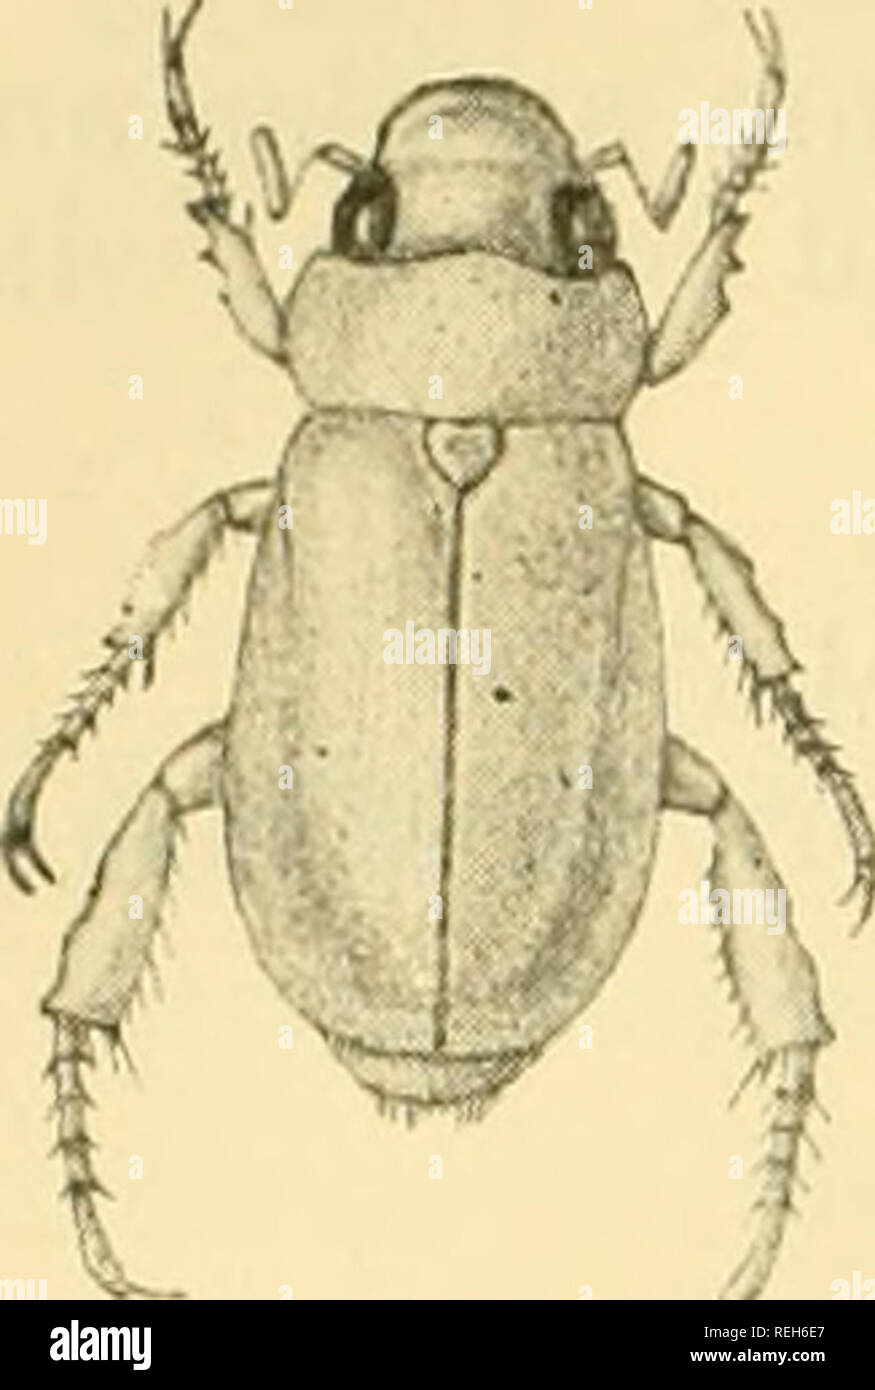 . Coleoptera: Lamellicornia. Scarabaeidae. 294 BUTELIN^.. setae, which are a little closer and longer upon the pygidium and lower surface. It is rather parallel-sided and moderately convex. The head is rugulose, the clypeus broad, with a strongly reflexed margin. Tlie pro- notum is short and broad, much broader than the head across the eyes, with deep, rather scattered punctures, the lateral mar- gins strongly rounded, the hind angles scarcely traceable. The scutellum bears a few punctures, and the elytra are rather strongly but not rugulosely punctured, with distinct double lines of punctures Stock Photo